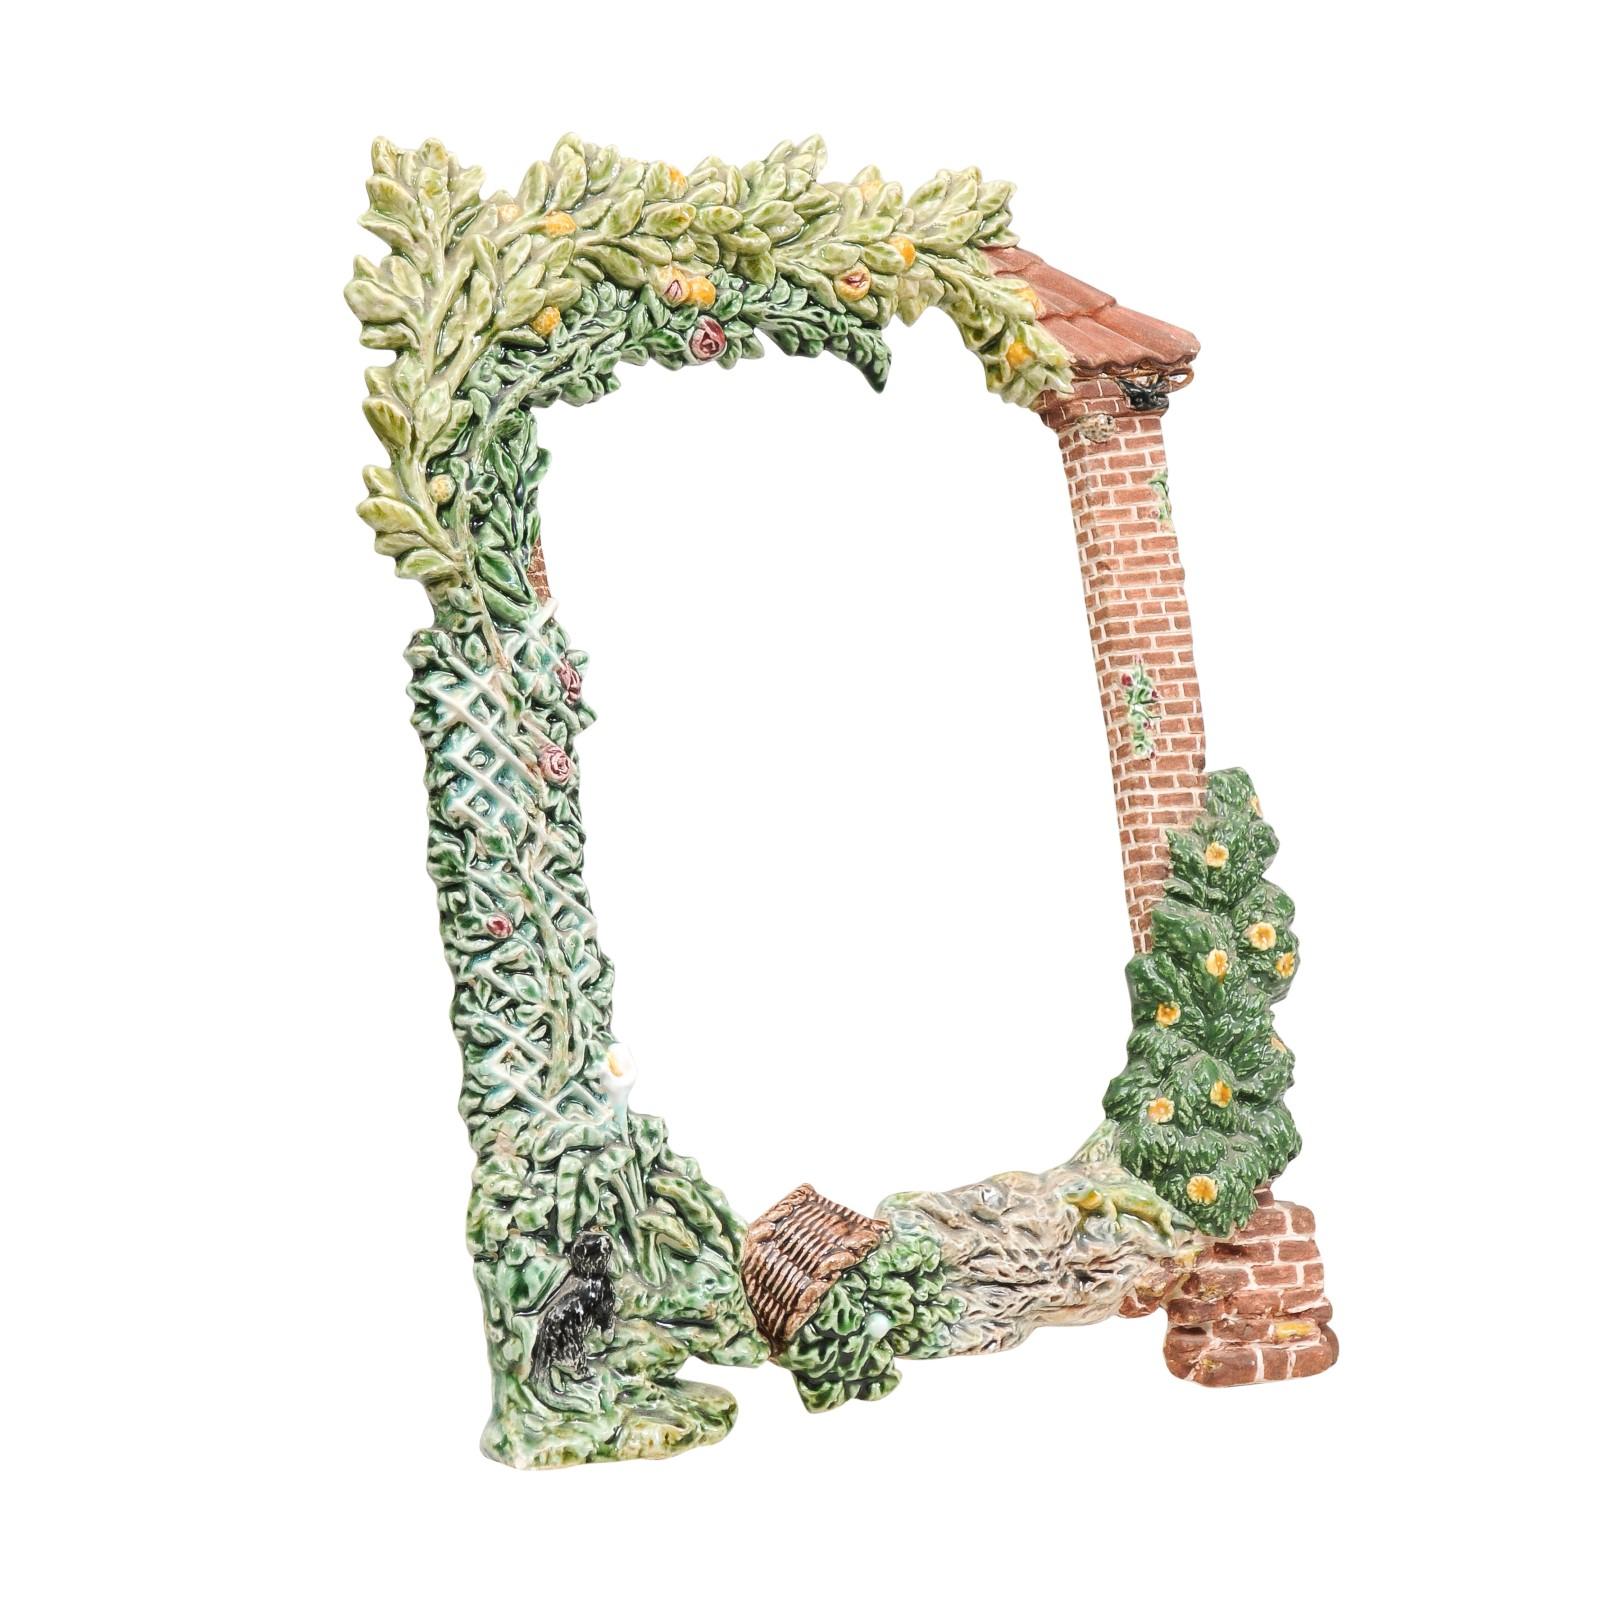 A French majolica frame from the 20th century depicting the side of a façade covered with foliage and trellis. Created in France, this majolica frame charms us with its lively depiction of the portion of a red brick façade supporting a red tiled